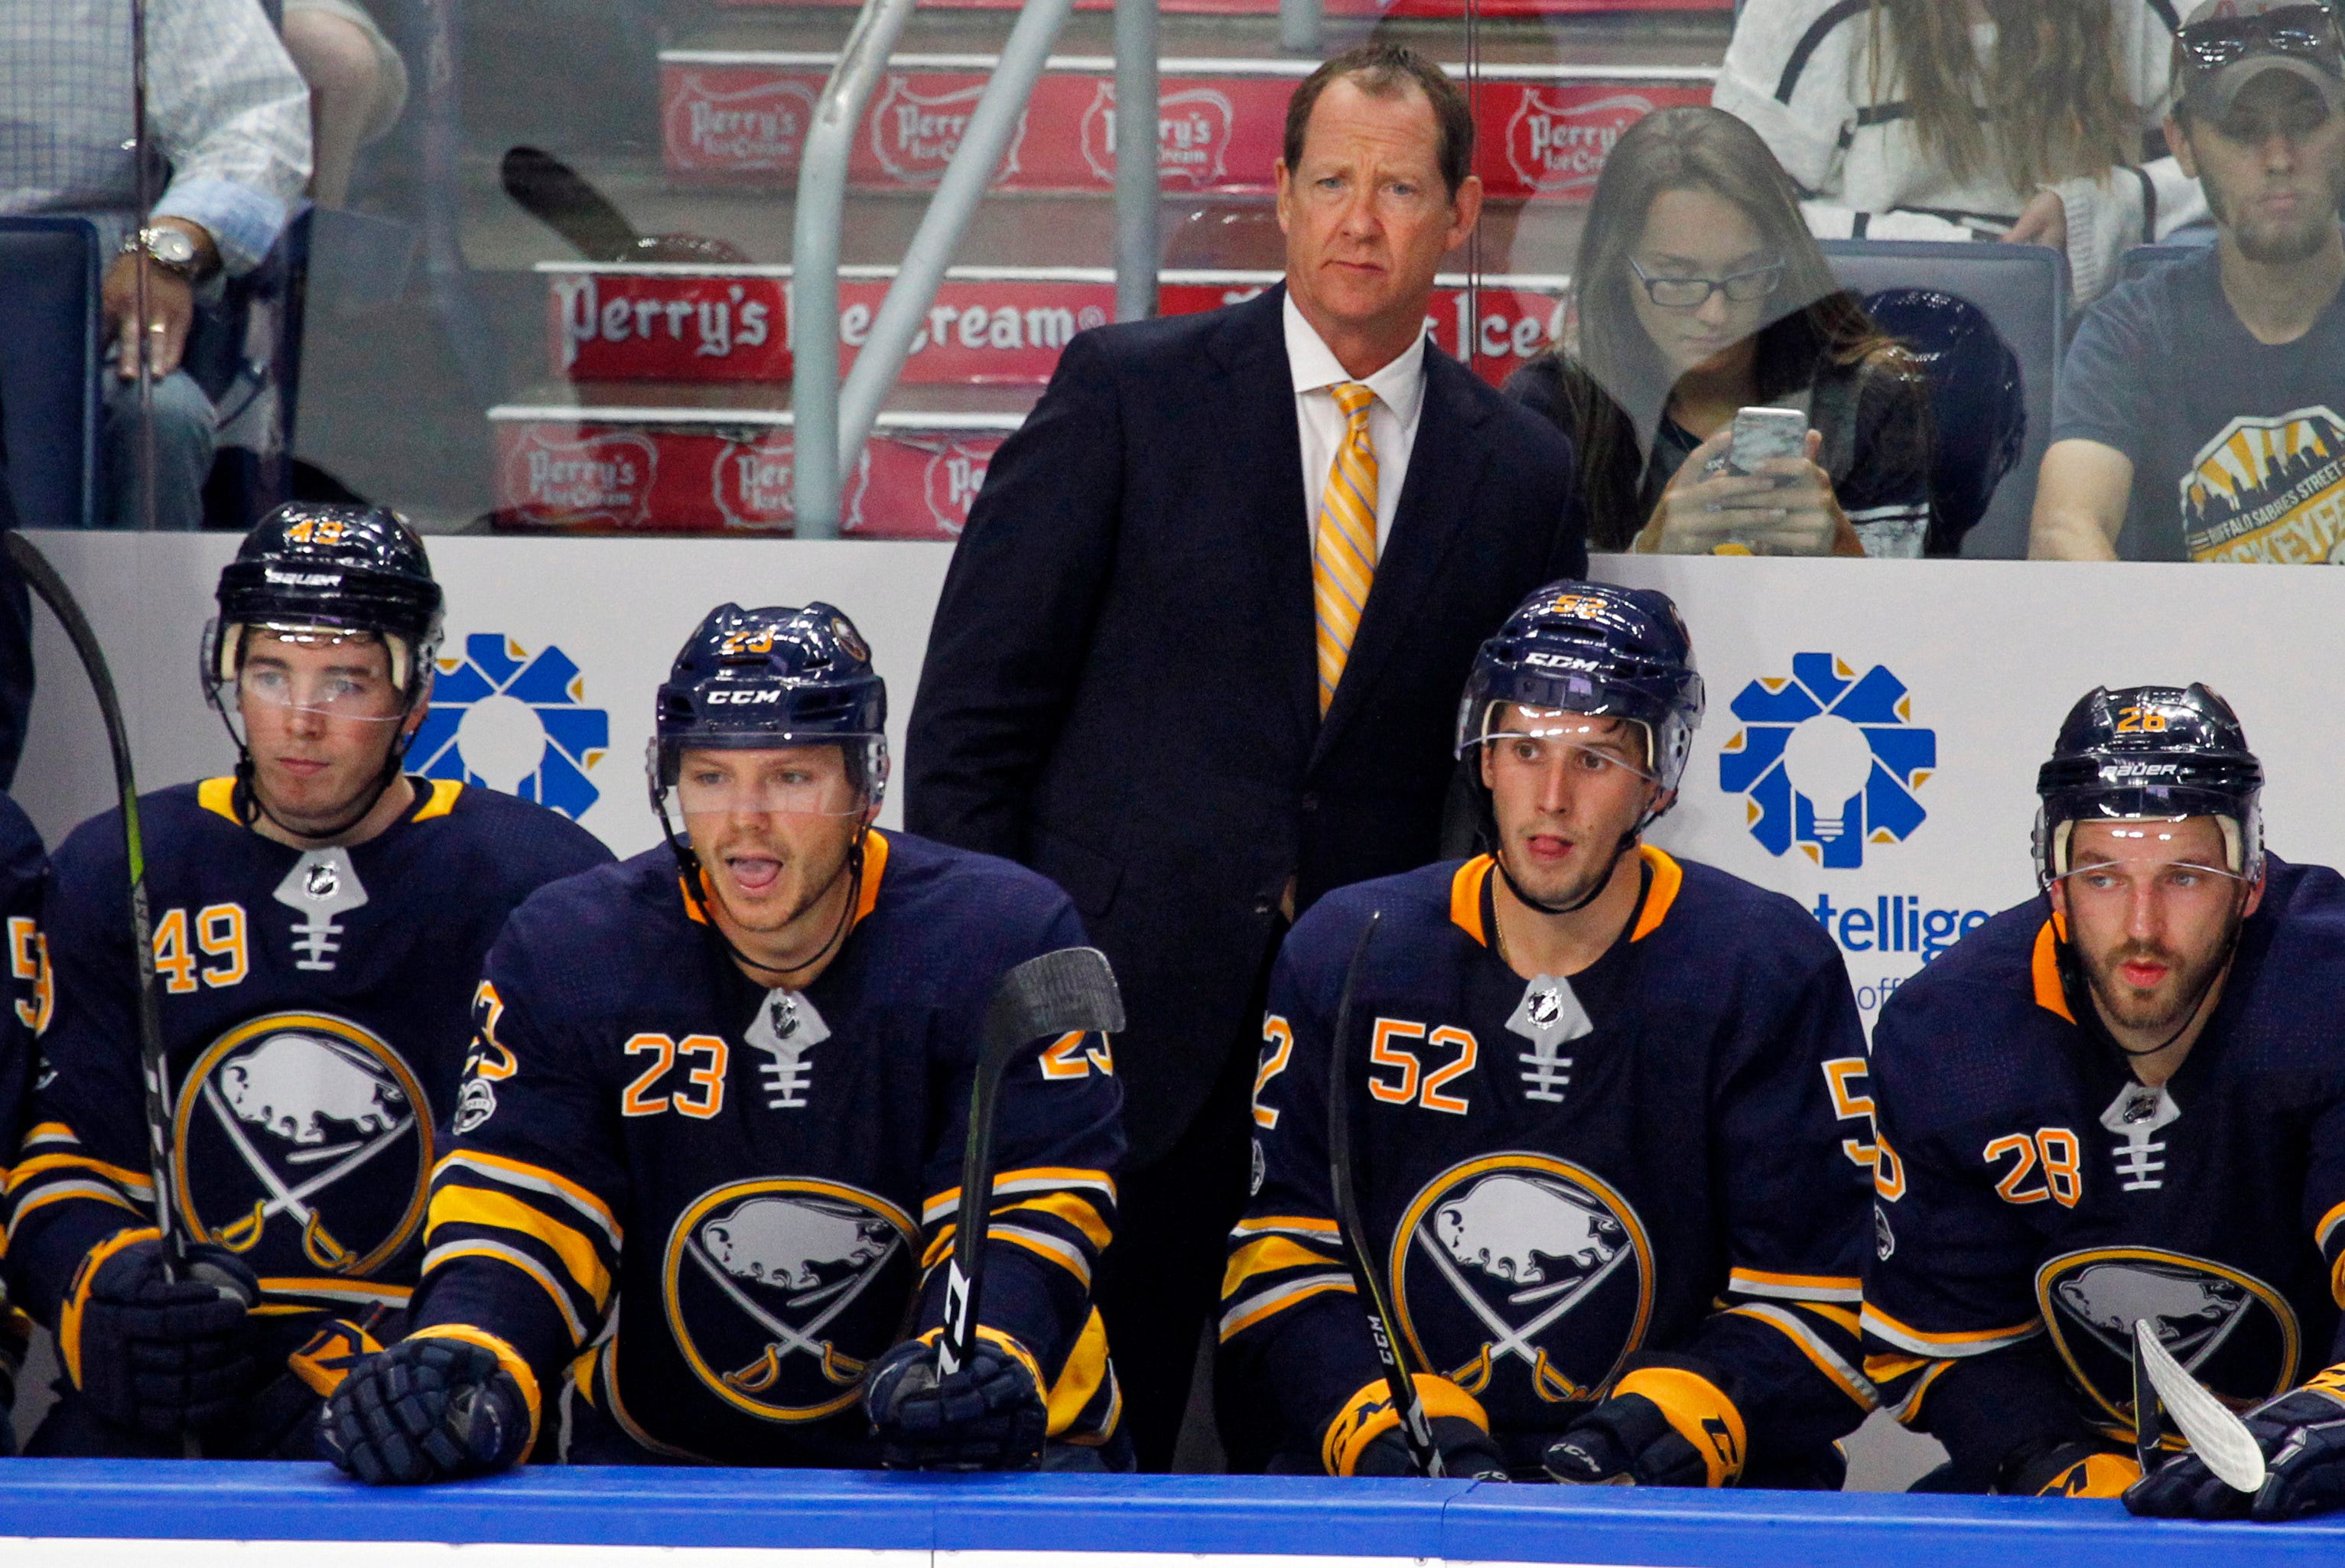 Pominville eager to help Sabres bring back buzz in Buffalo